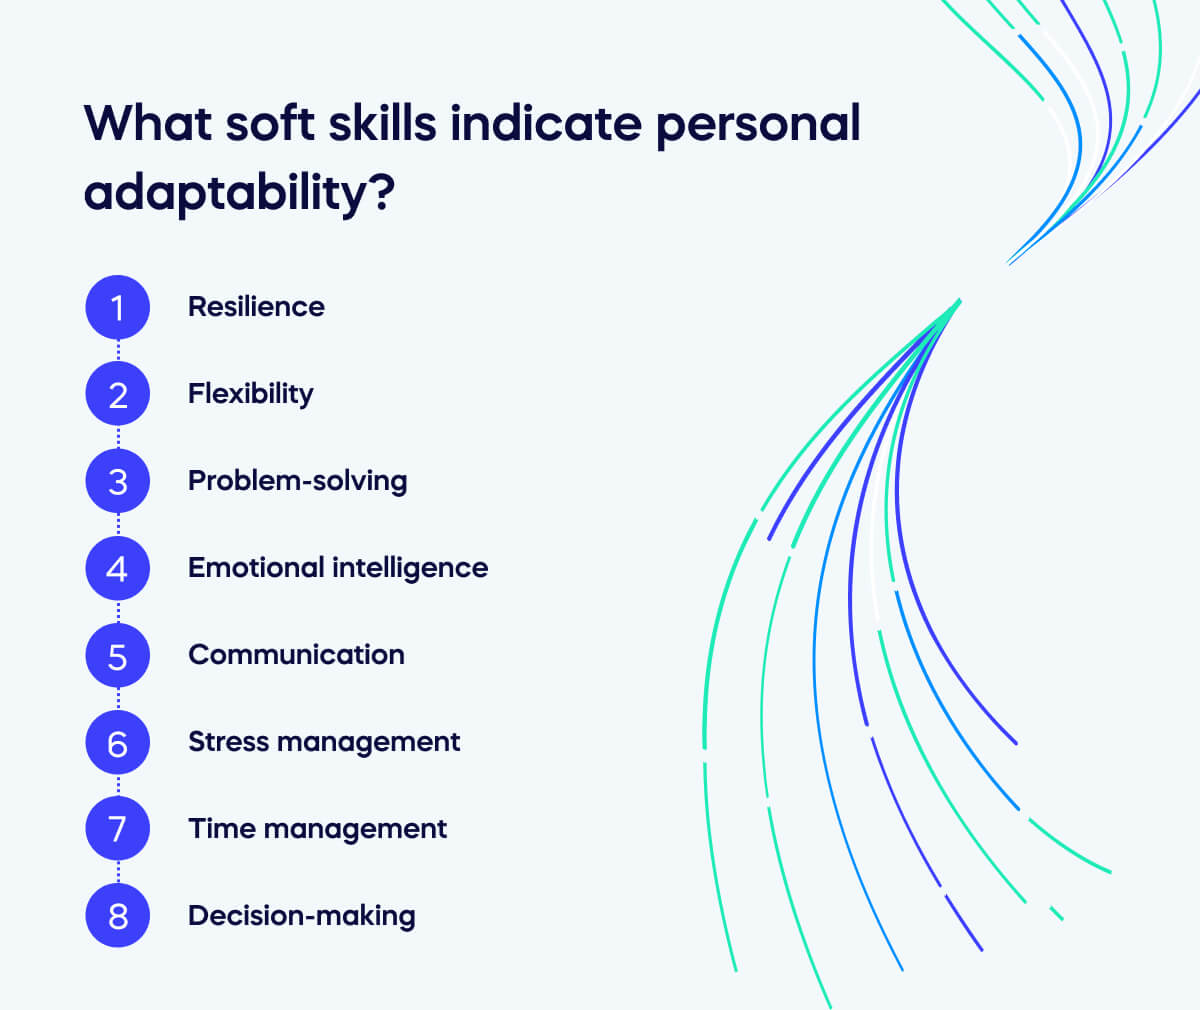 What soft skills indicate personal adaptability